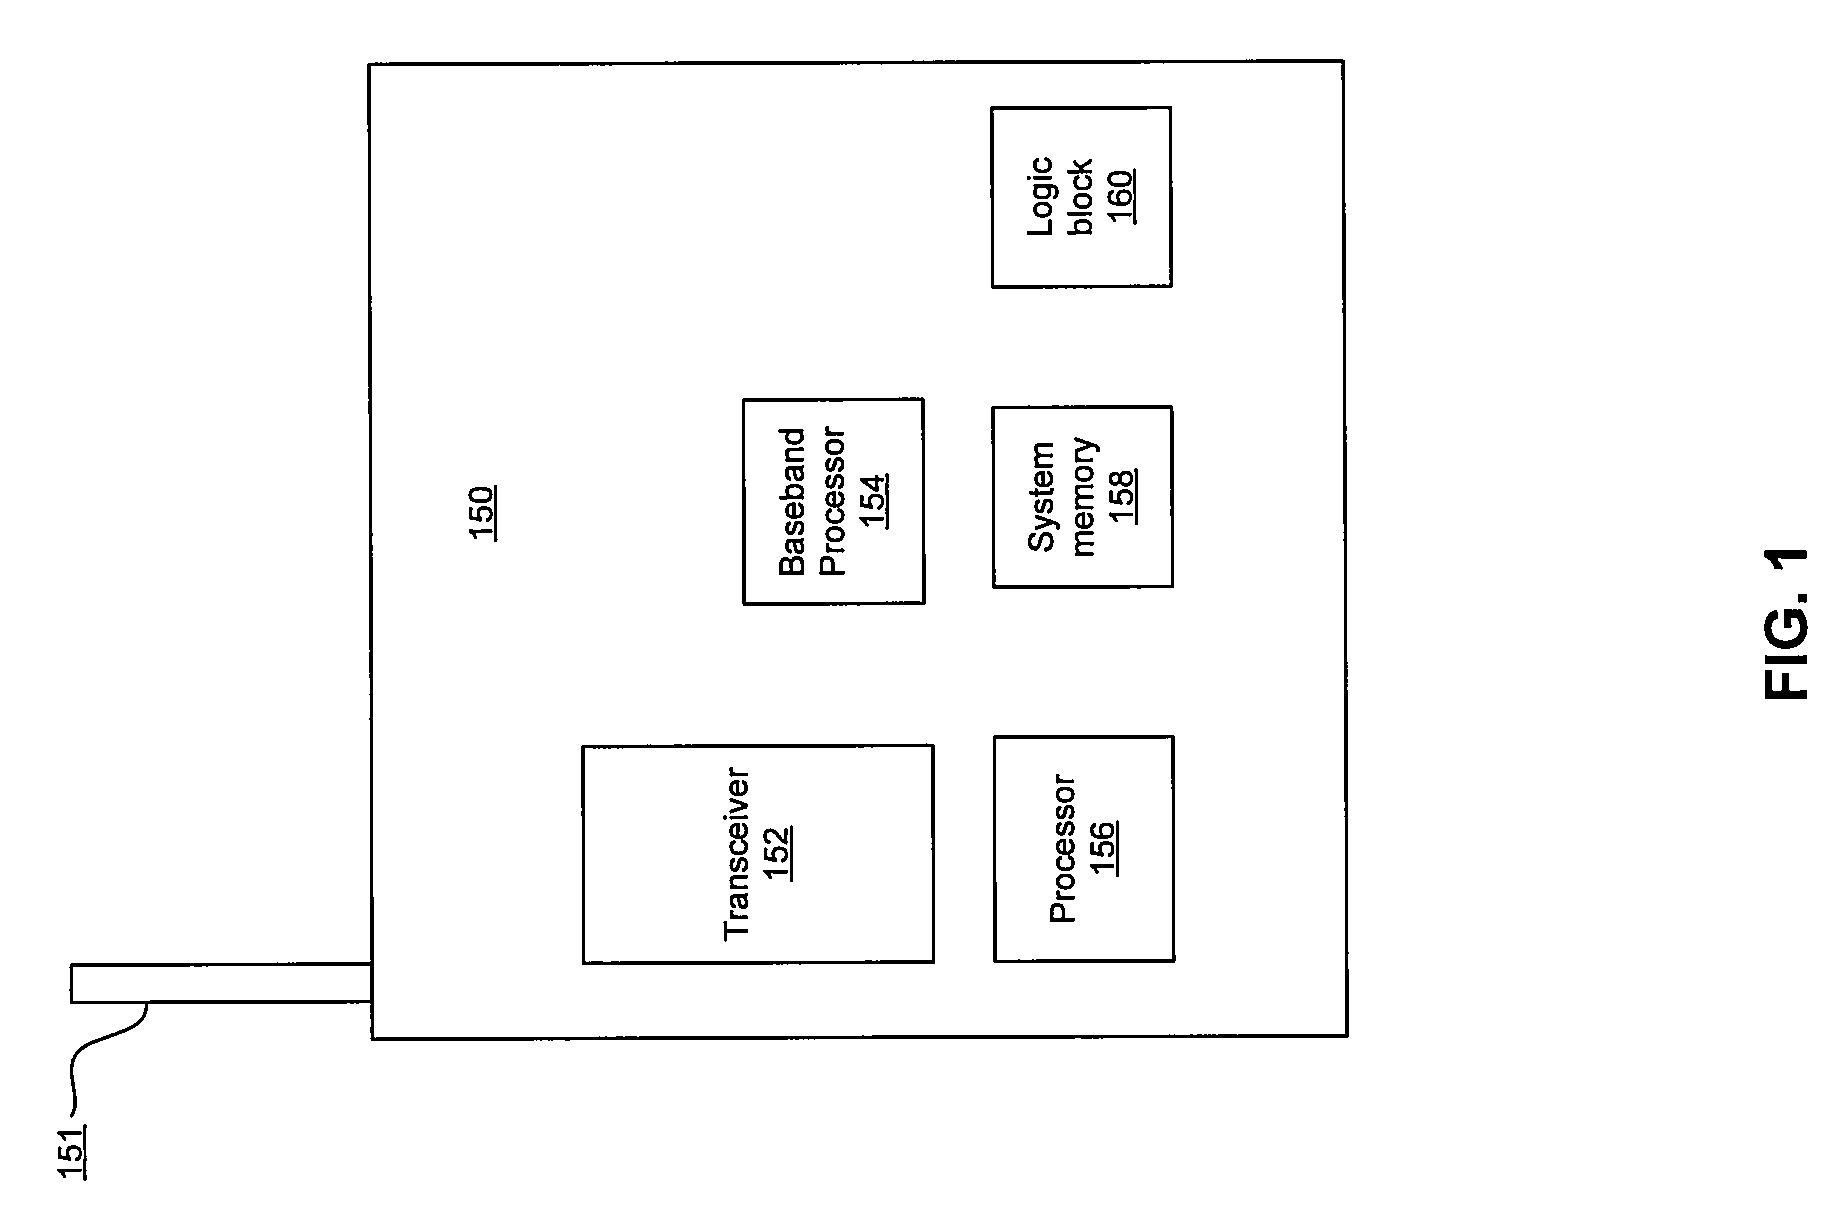 Method and system for filters embedded in an integrated circuit package